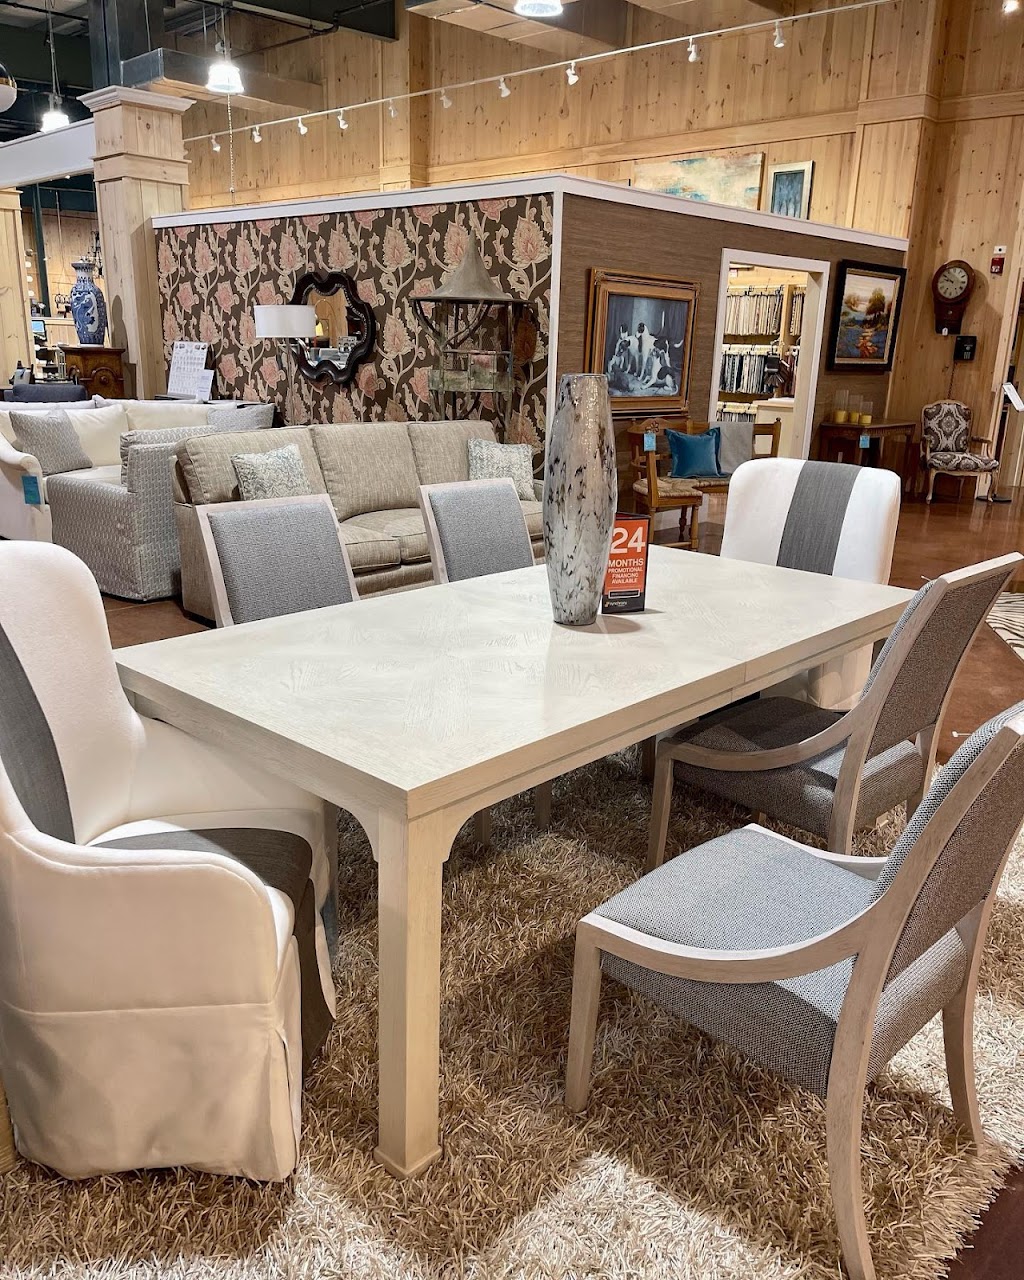 Middlebury Furniture & Home Design | 1101 Southford Rd, Middlebury, CT 06762 | Phone: (203) 528-0130